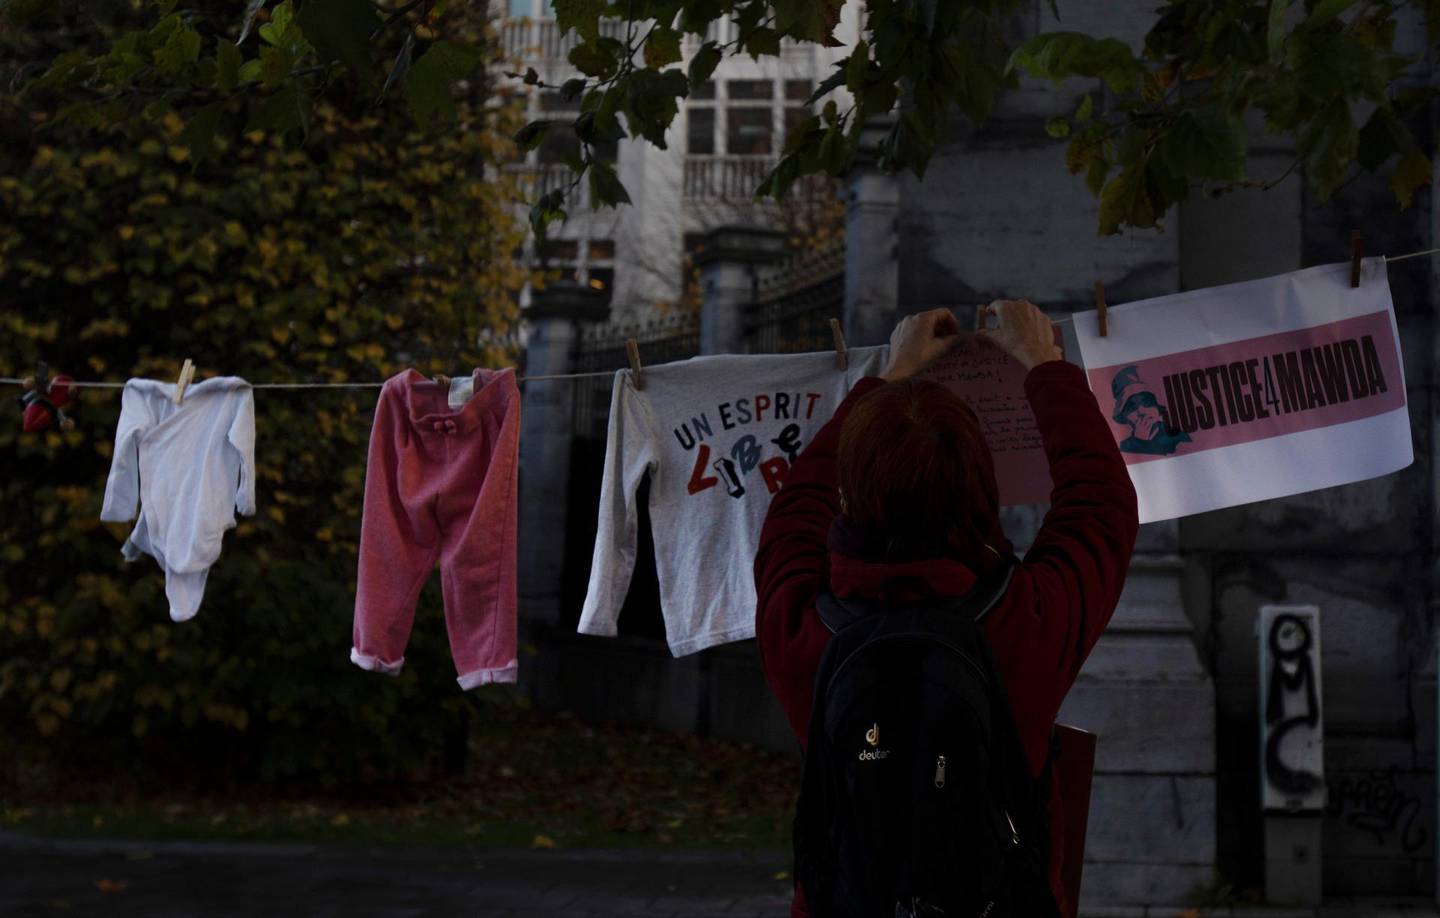 A woman hangs a piece of children's clothing on a line during a solidarity event for Mawda Shawri at the courthouse in Brussels, Monday, Nov. 23, 2020. A trial opened on Monday in the shooting death of two-year old toddler, Mawda Shawri, who was in a van during a high-speed chase between police and suspected migrant smugglers seeking to get to Britain. At the trial in Belgium's southern Mons, a policeman stands accused of involuntary manslaughter and two other men for being suspected migrant smugglers. (AP Photo/Virginia Mayo)